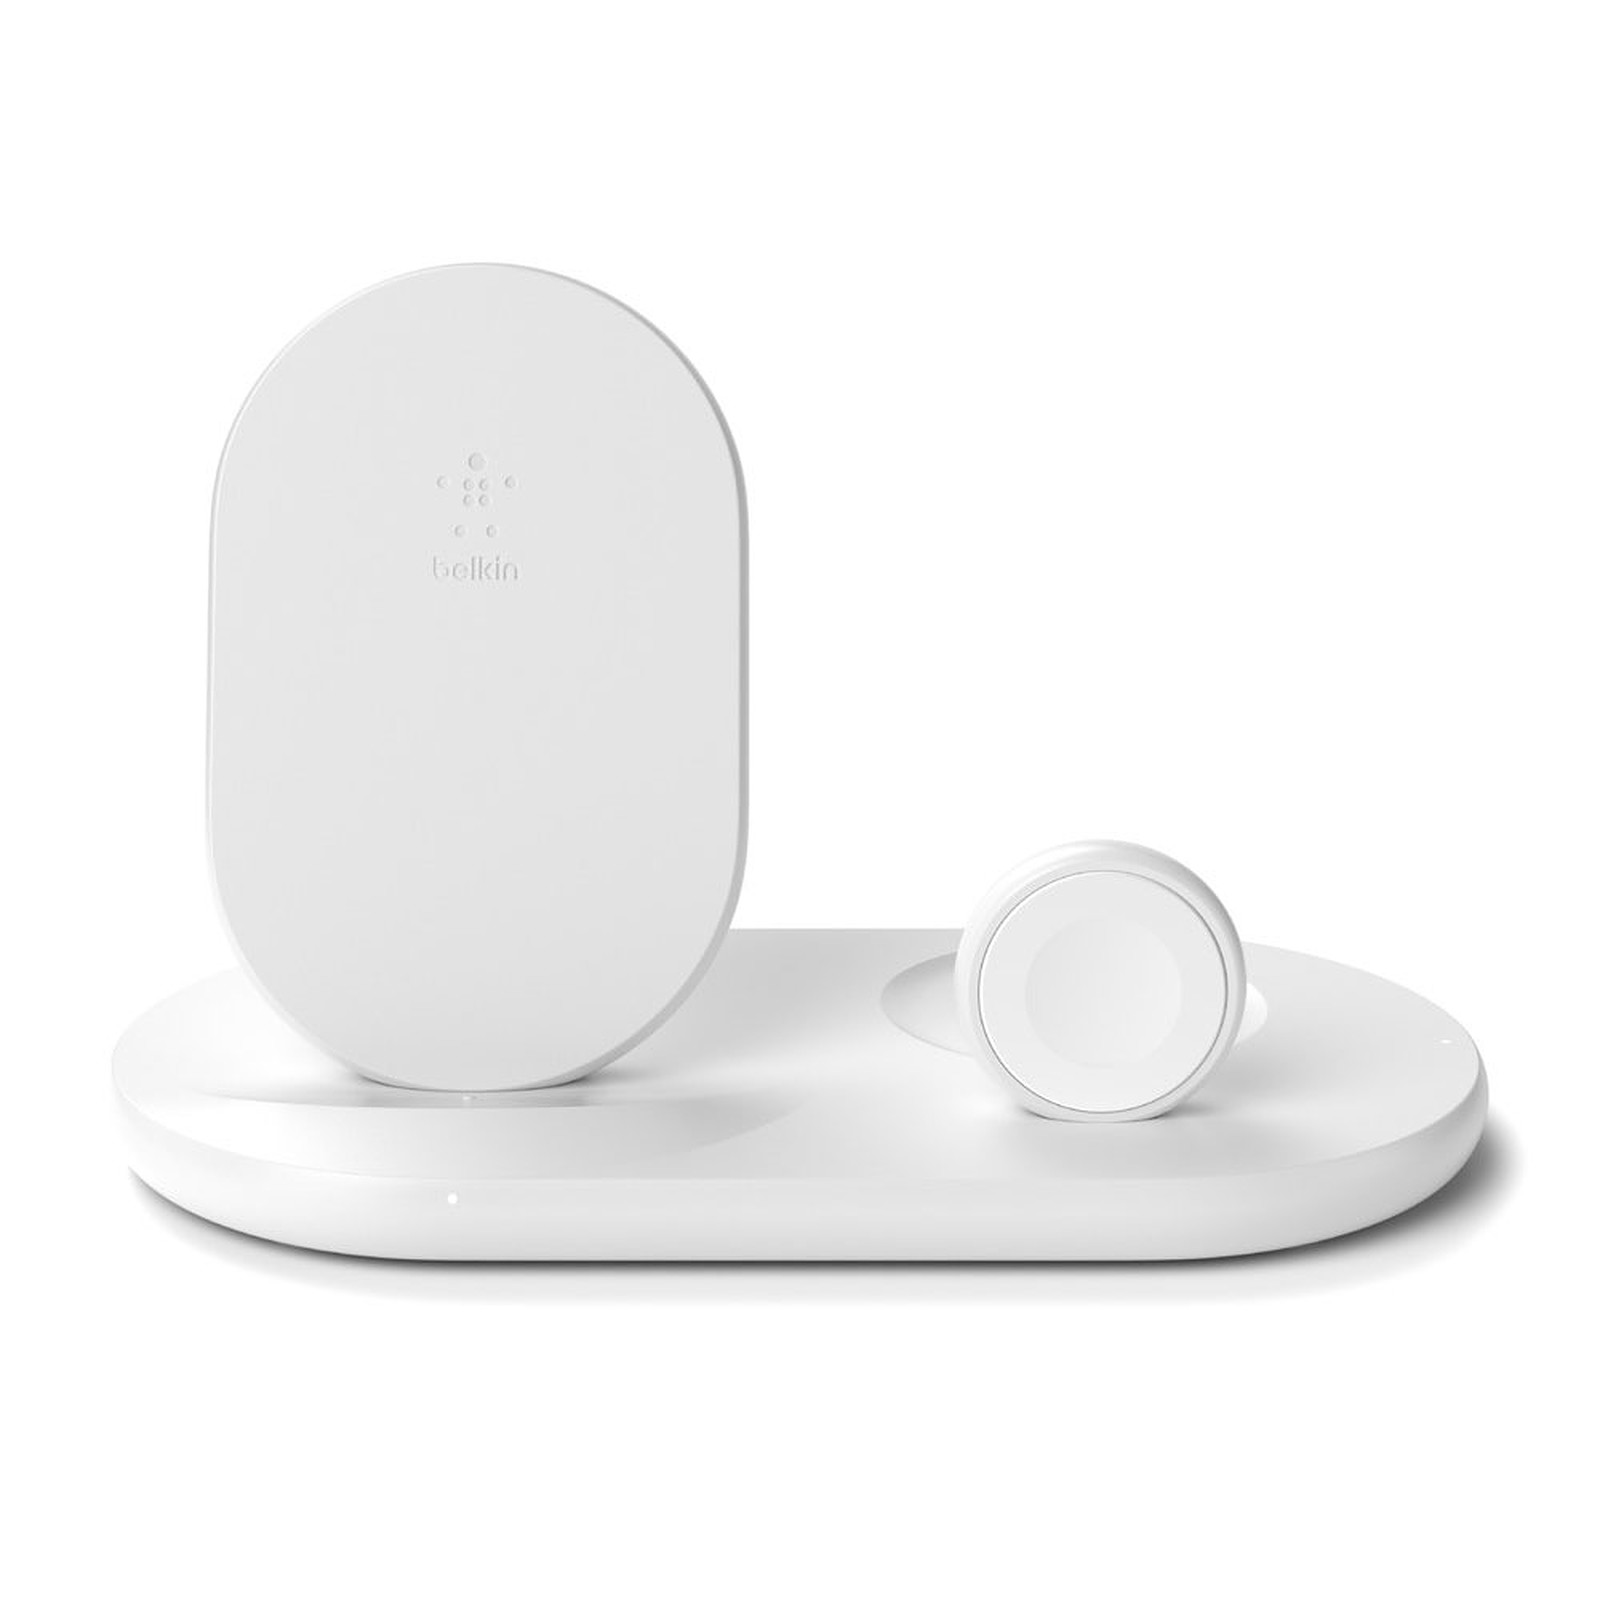 Belkin Station de recharge Boost Charge pour appareils Apple (Blanc) - Chargeur telephone Belkin - Occasion